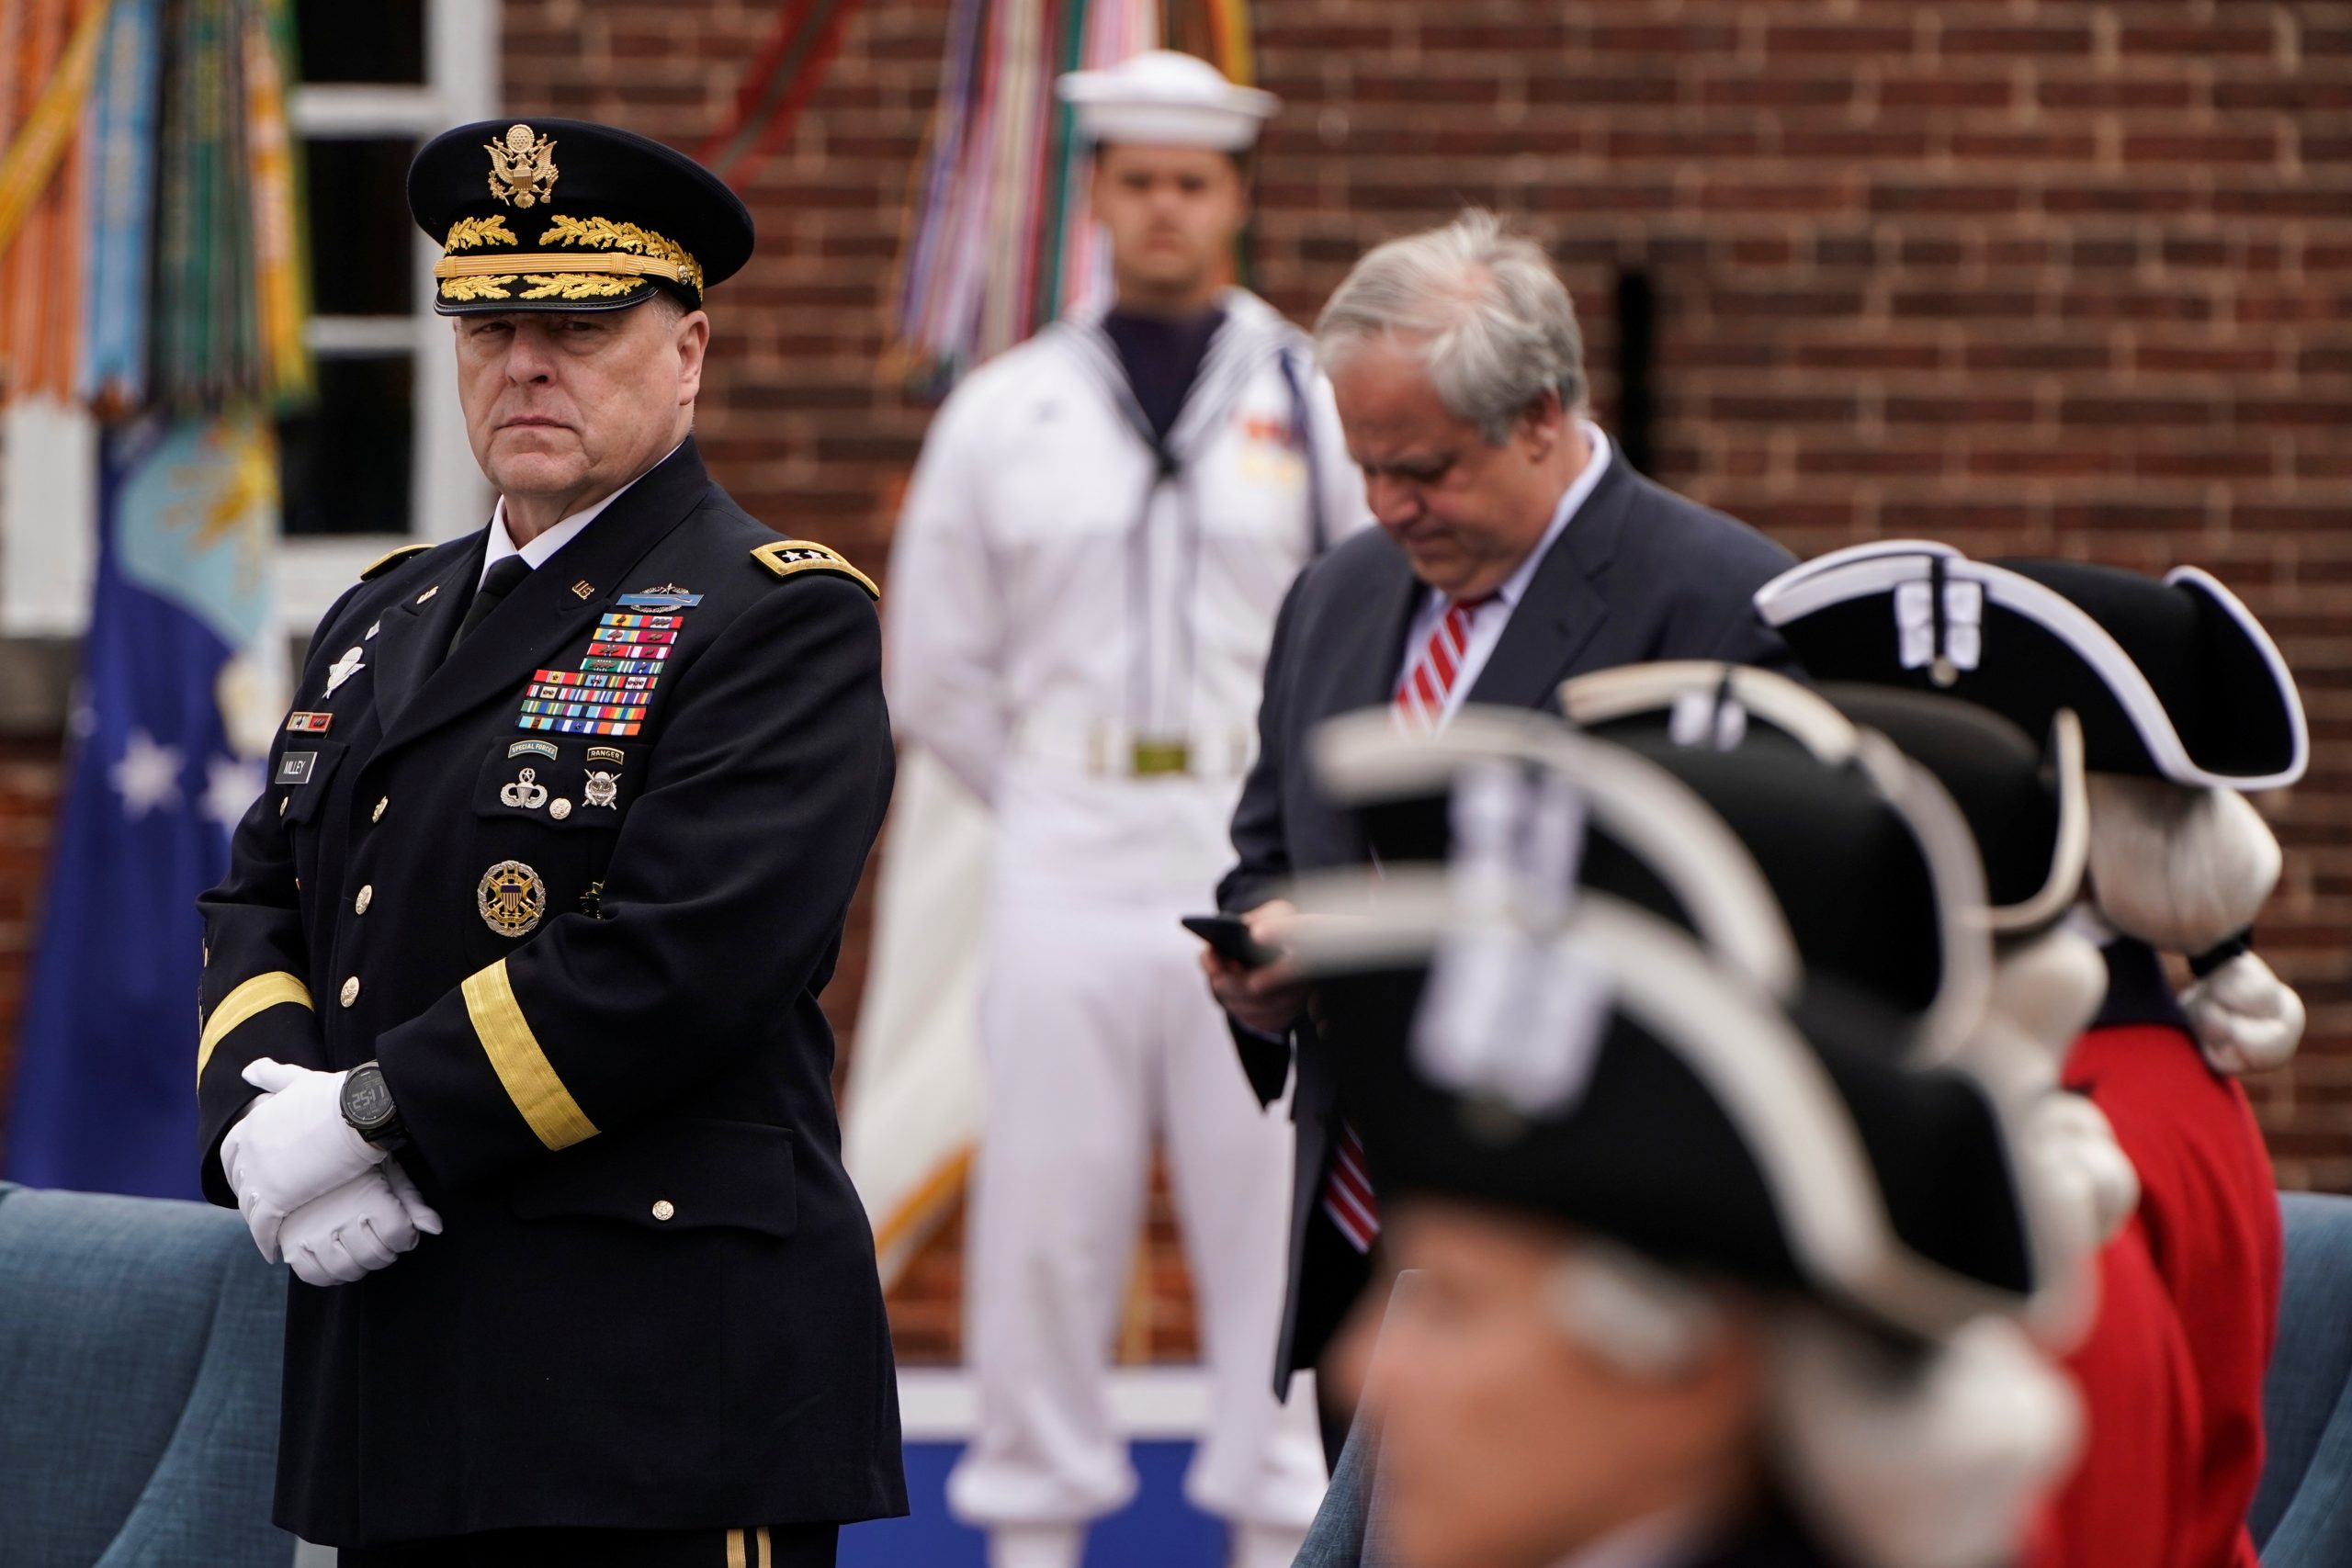 U.S. President Trump attends a Memorial Day ceremony at Fort McHenry in Baltimore Chairman of the Joint Chiefs of Staff General Mark Milley awaits the arrival of U.S. President Donald Trump and first lady Melania Trump for a Memorial Day ceremony at Fort McHenry in Baltimore, Maryland, U.S., May 25, 2020.      REUTERS/Joshua Roberts JOSHUA ROBERTS